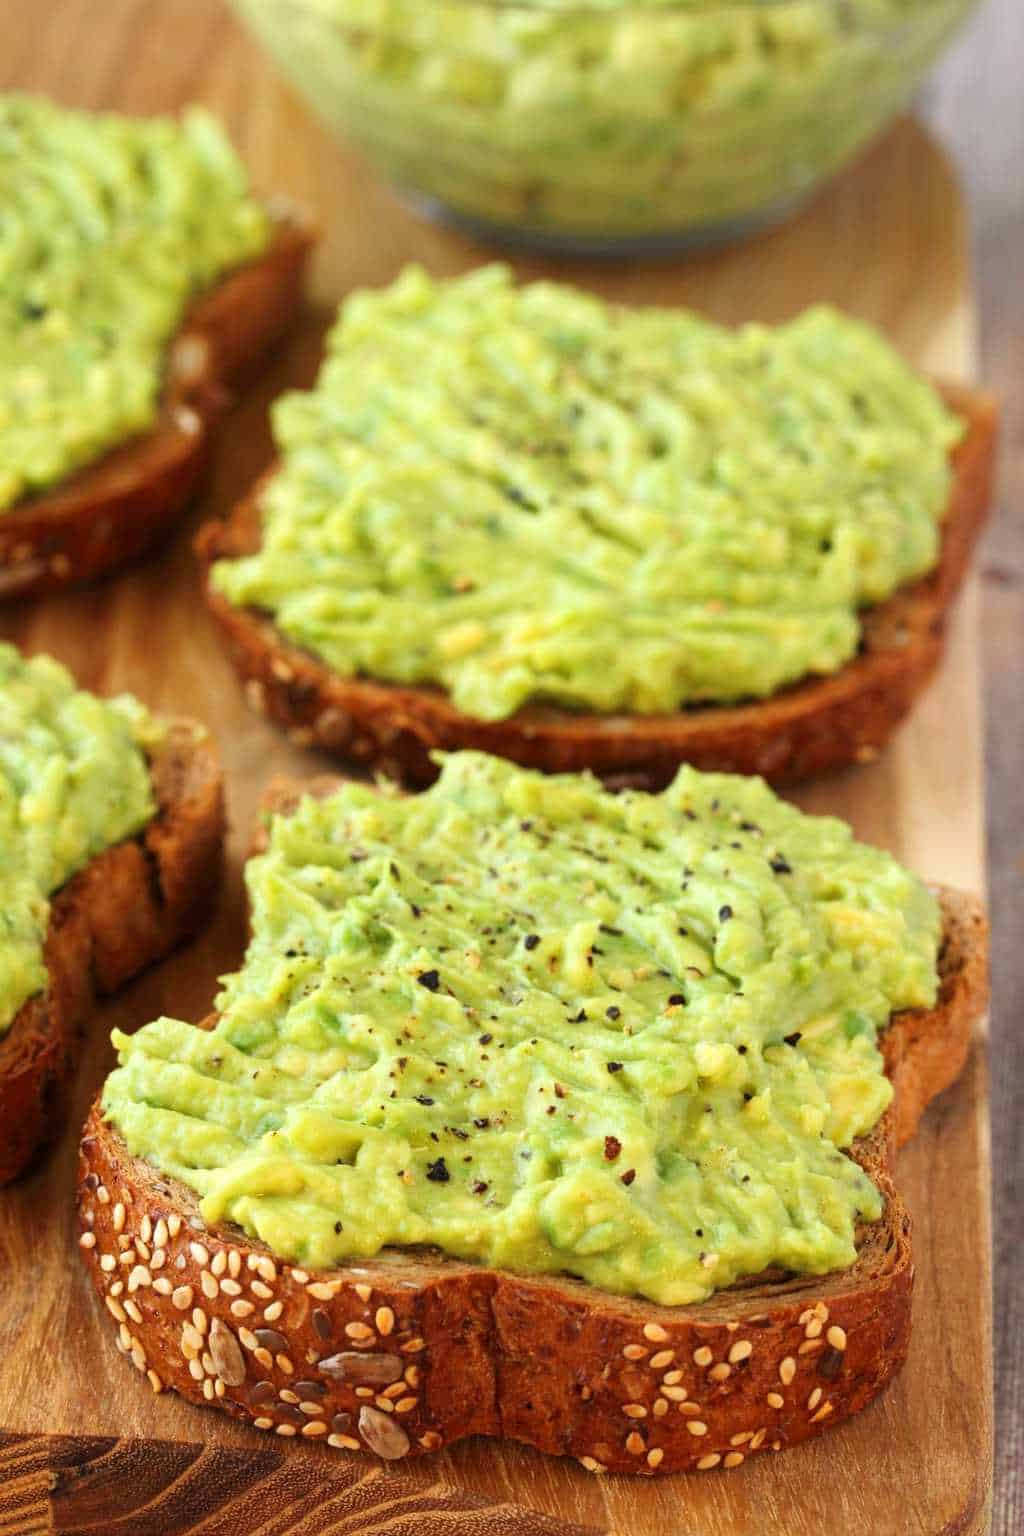 Slices of avocado toast on a wooden board.